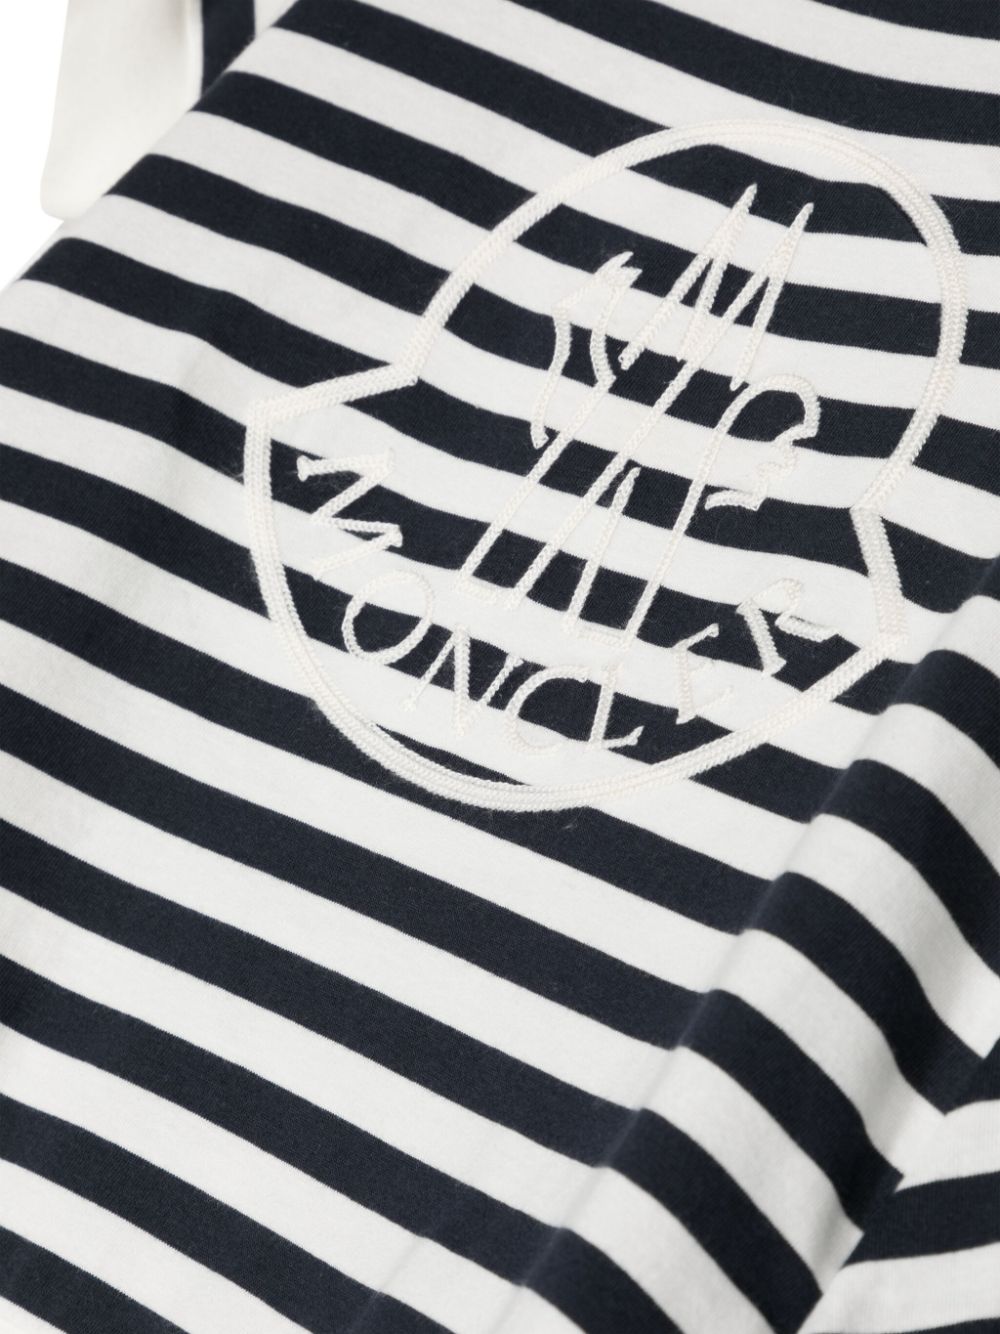 Logo-embroidered striped T-shirt<BR/><BR/><BR/>